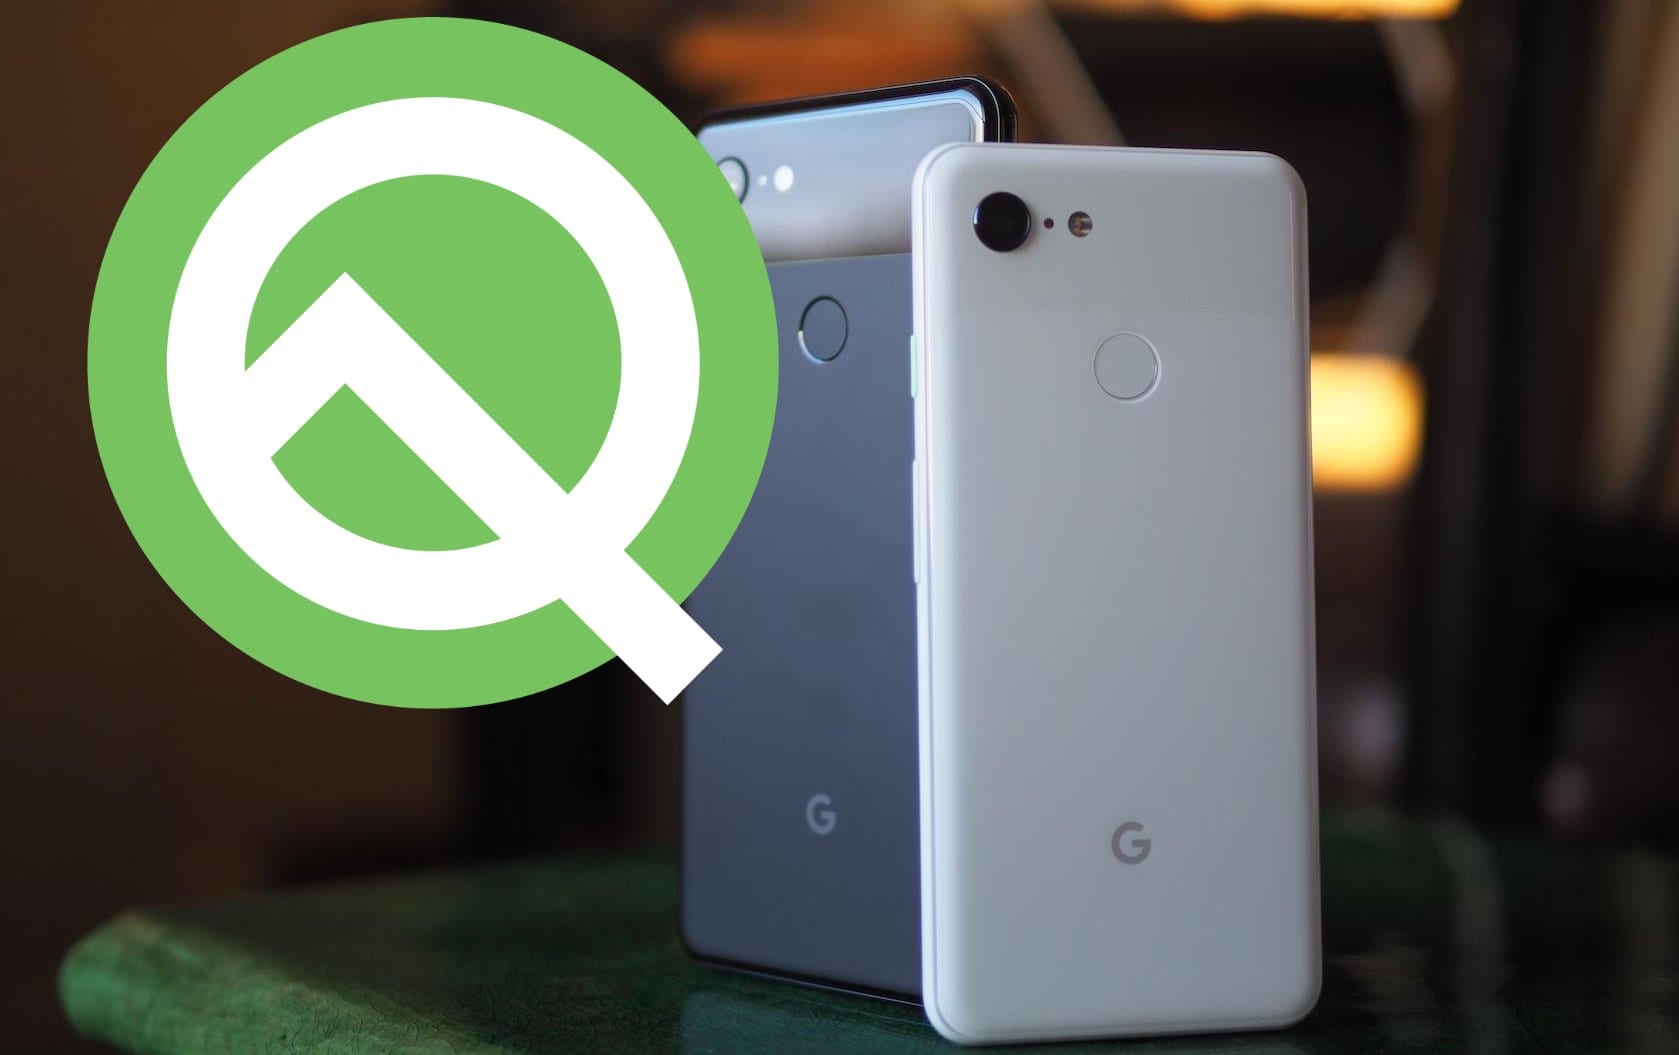 Android Q adding support to detect Deep press